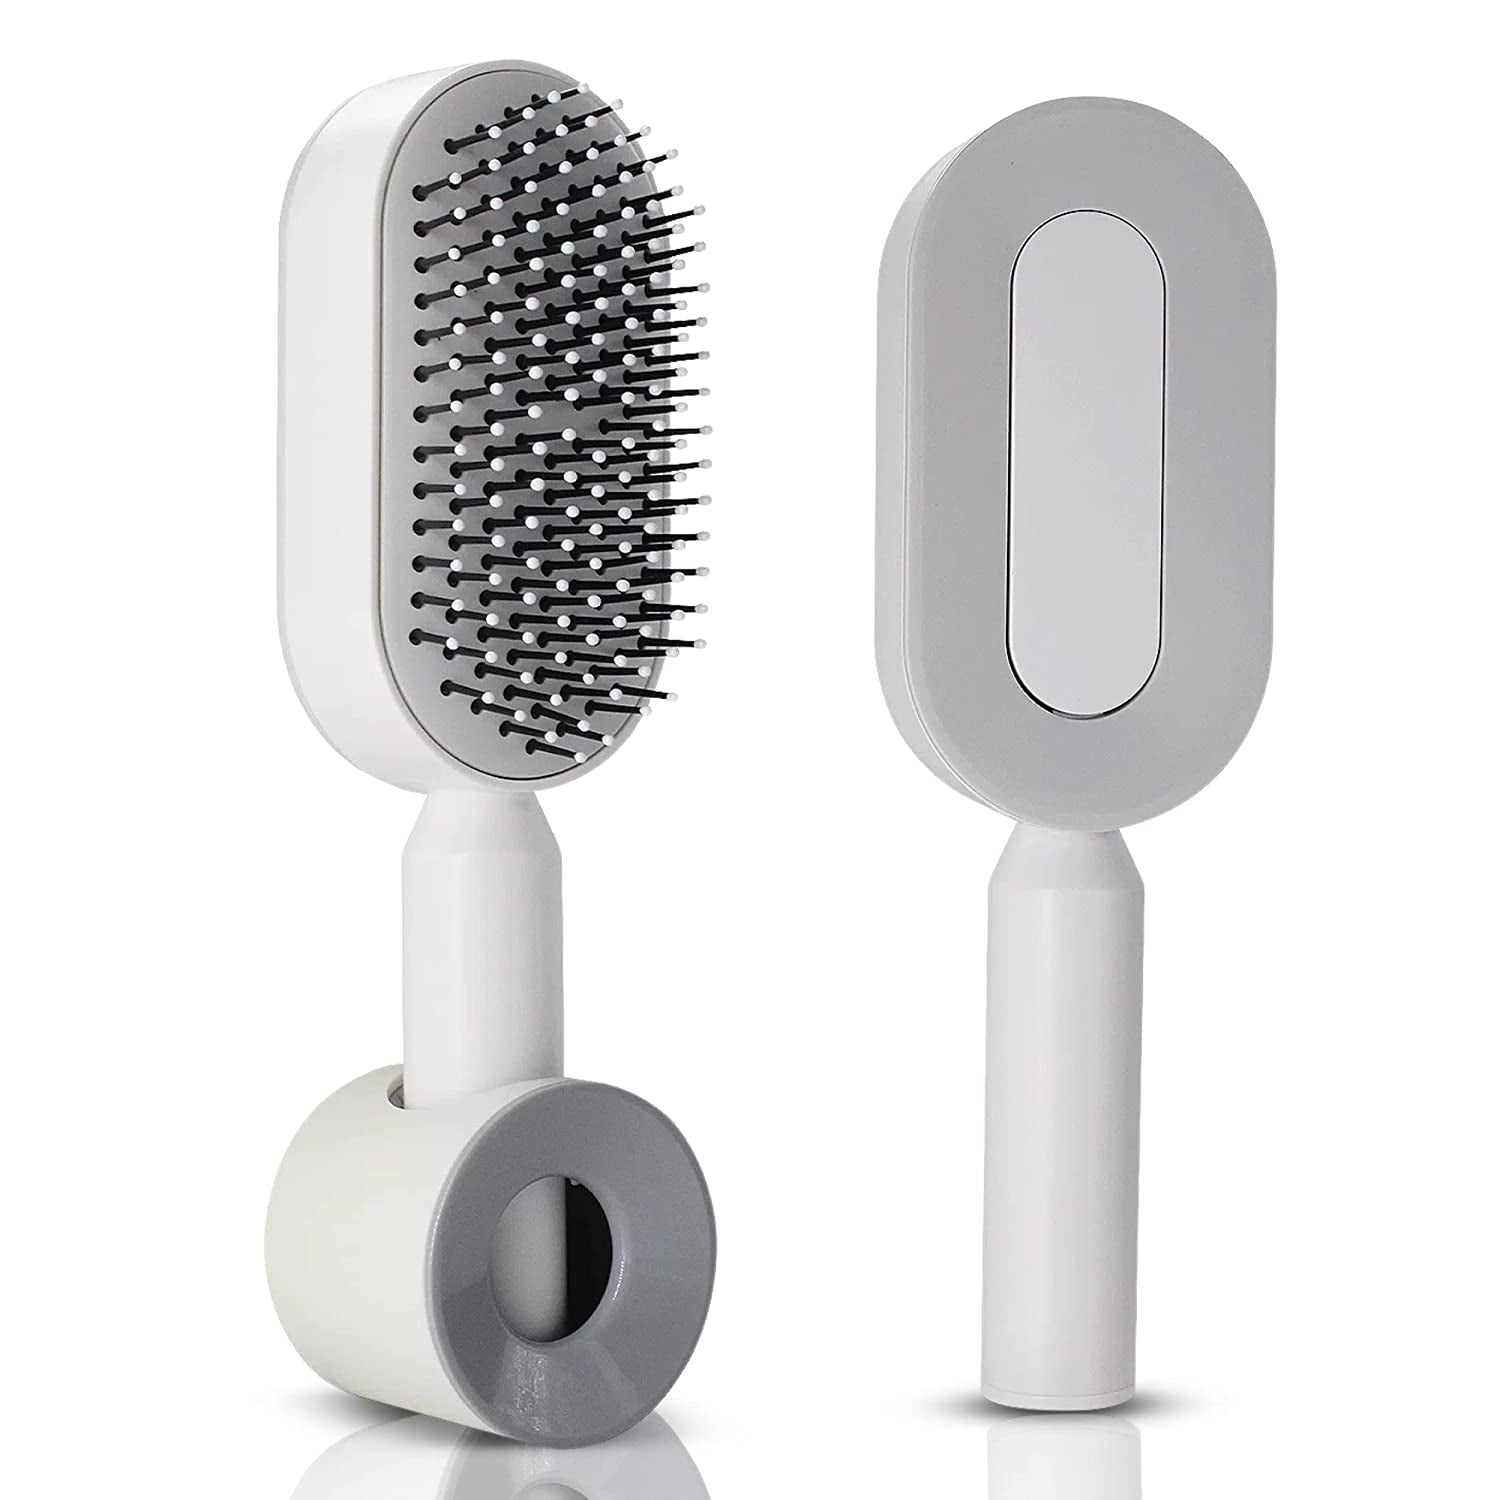 Self Cleaning Hair Brush - Everyday-Sales.com